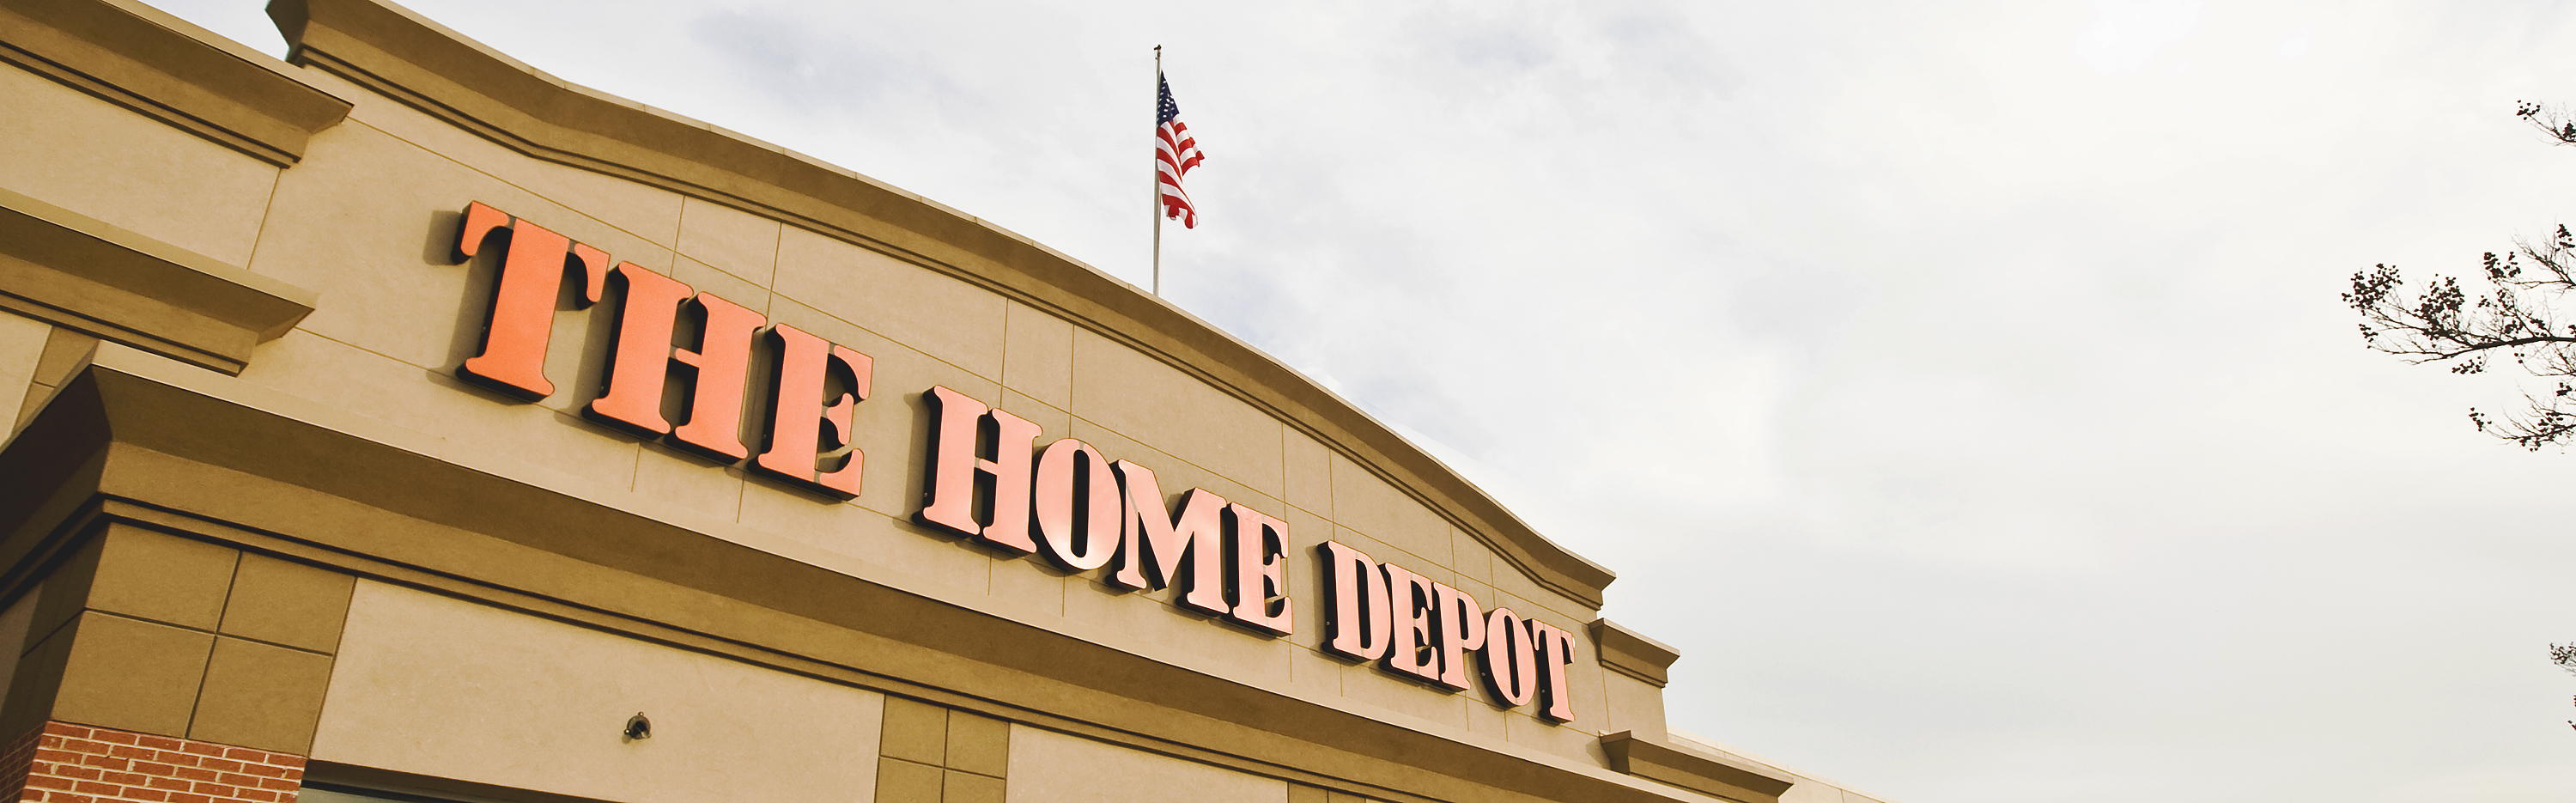 The Home Depot Memorial Day Mystery The Case of The Home Depot’s